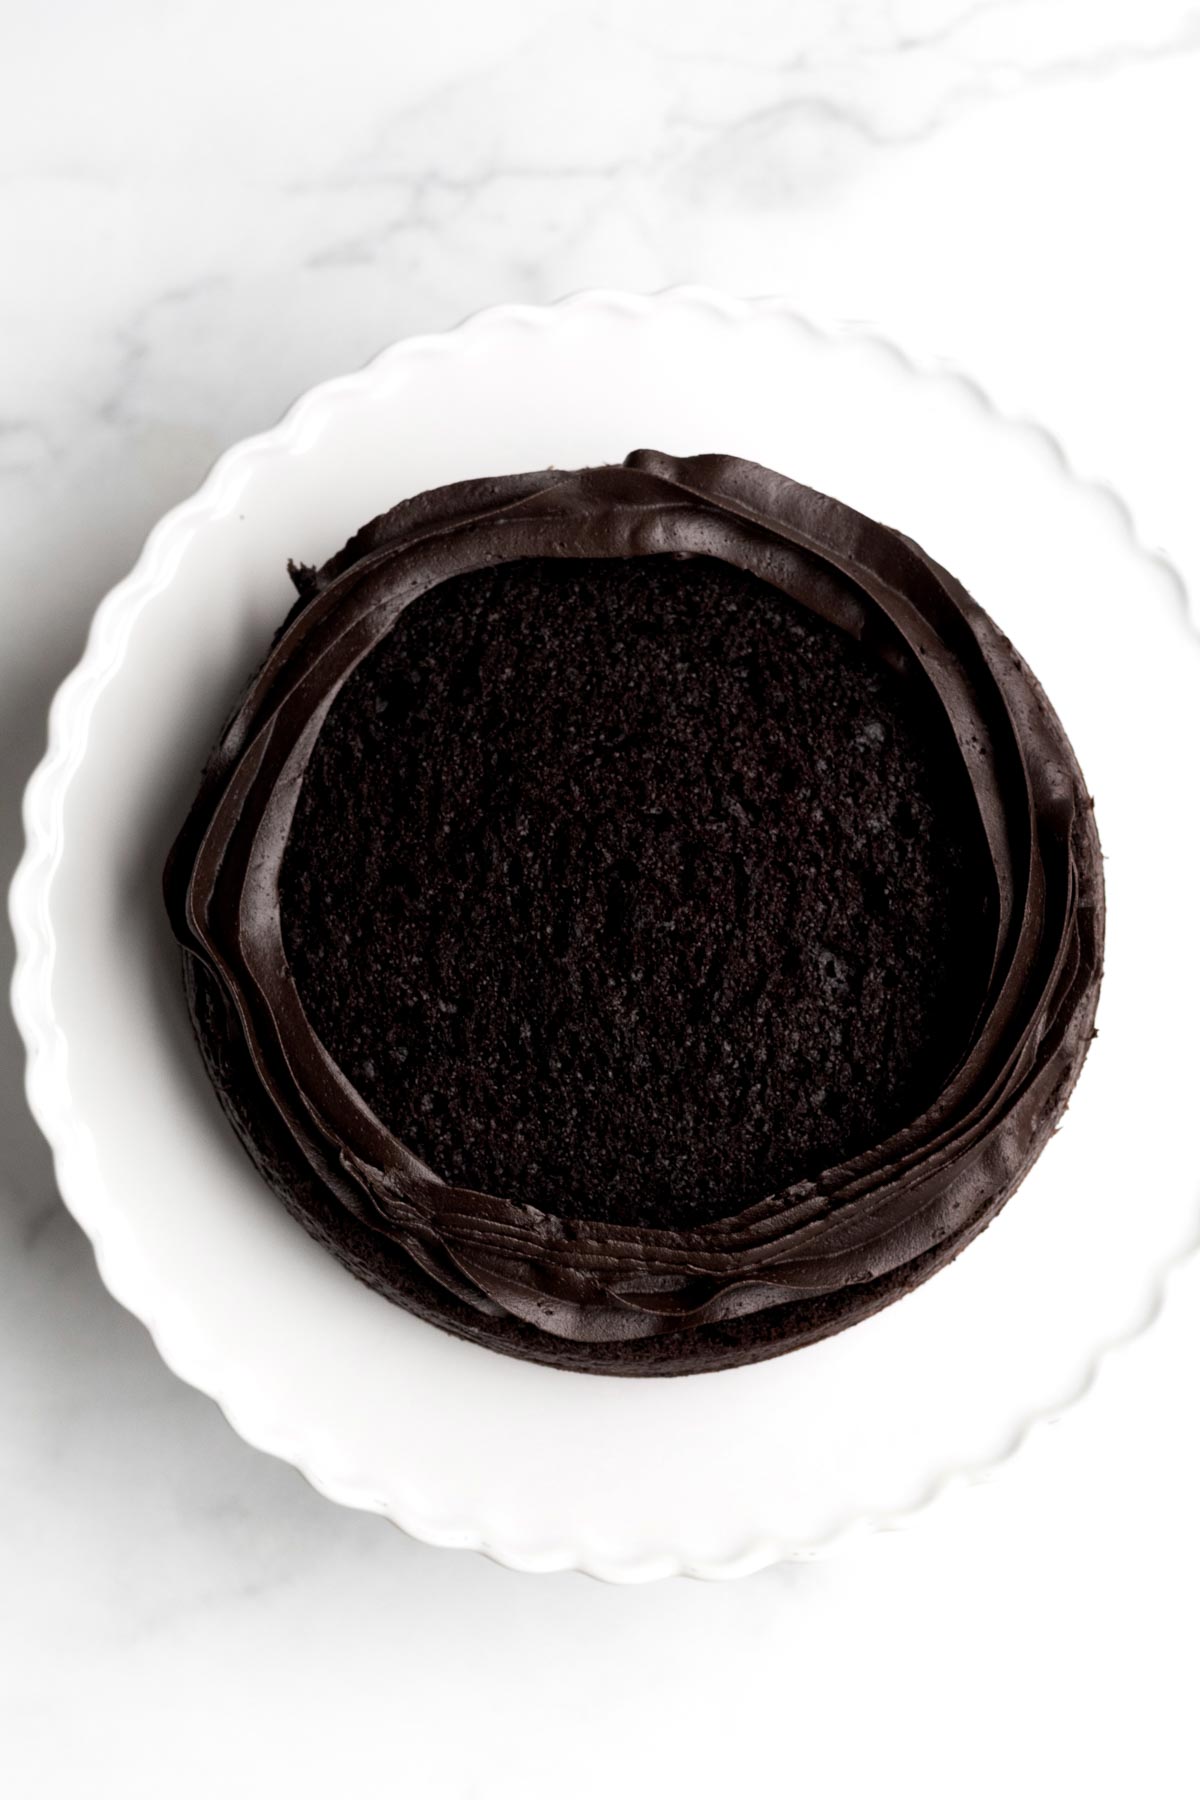 A piped ring of chocolate frosting around the top of the chocolate cake.